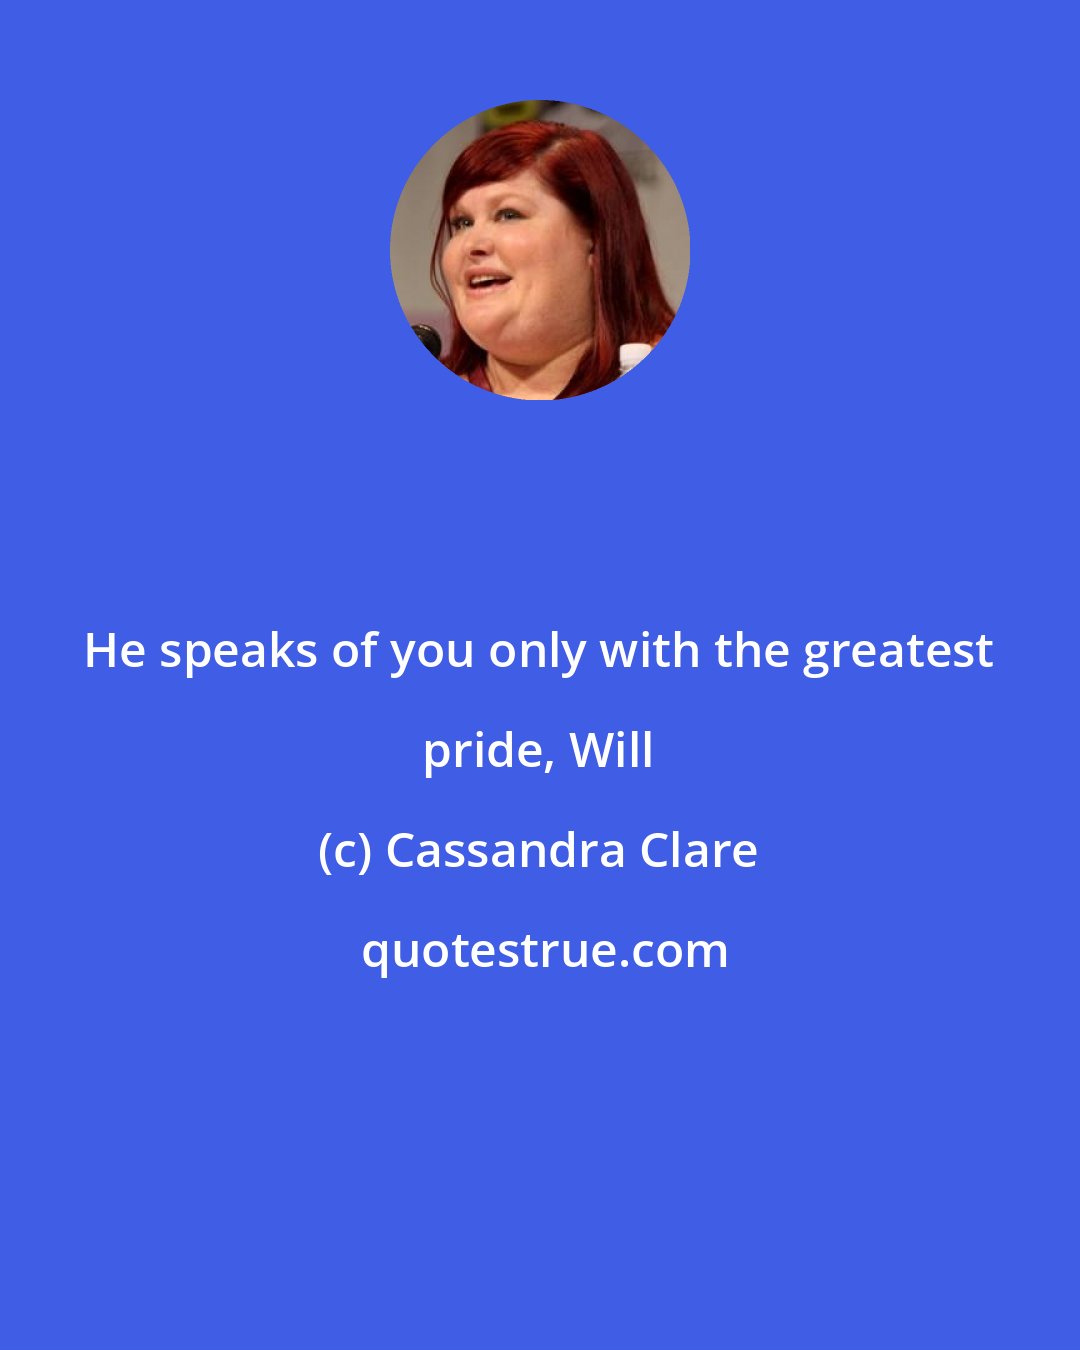 Cassandra Clare: He speaks of you only with the greatest pride, Will